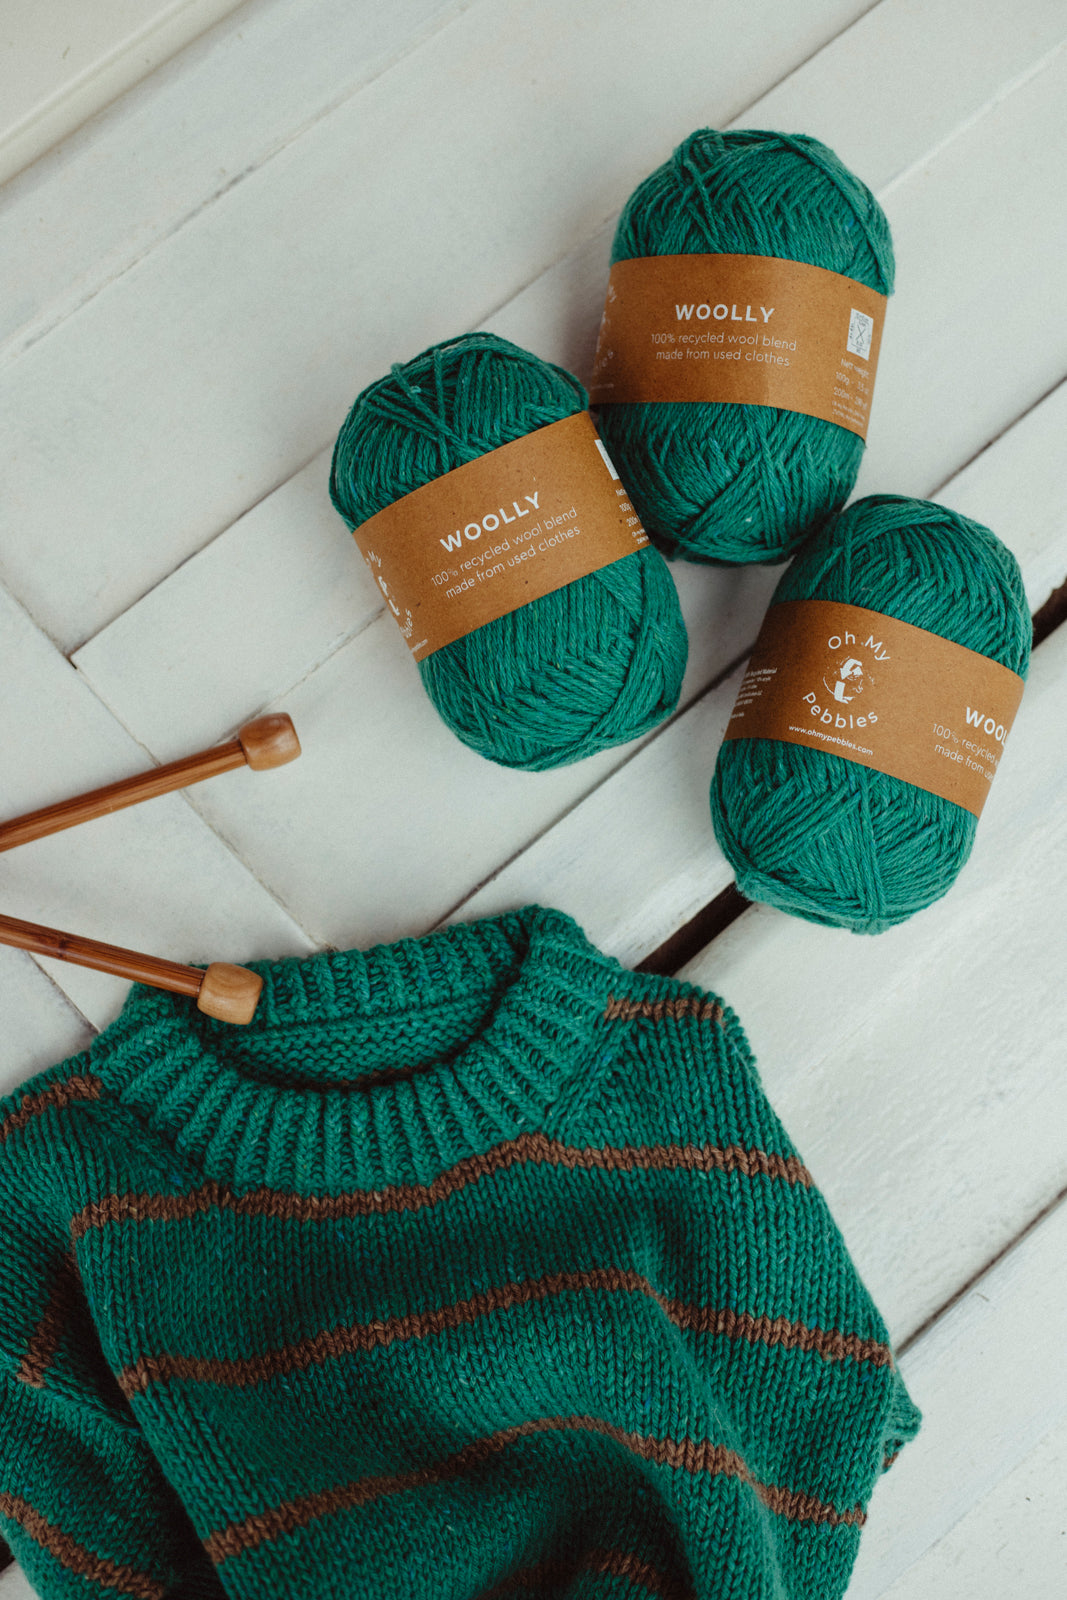 100% recycled knitting yarn made from used clothes – Oh my Pebbles